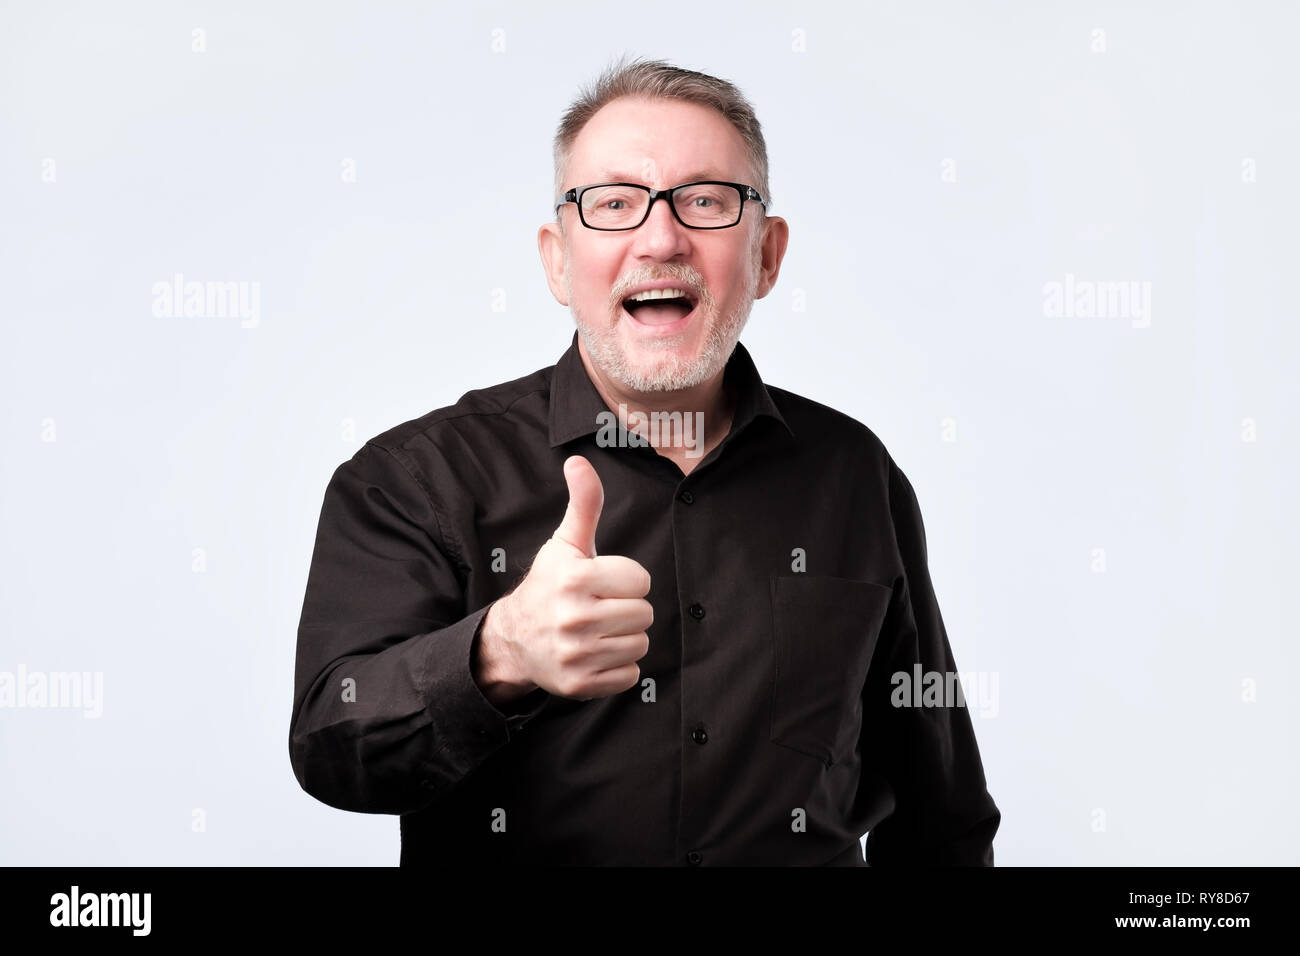 senior handsome man in black shirt and glasses showing thumbs up gesture Stock Photo